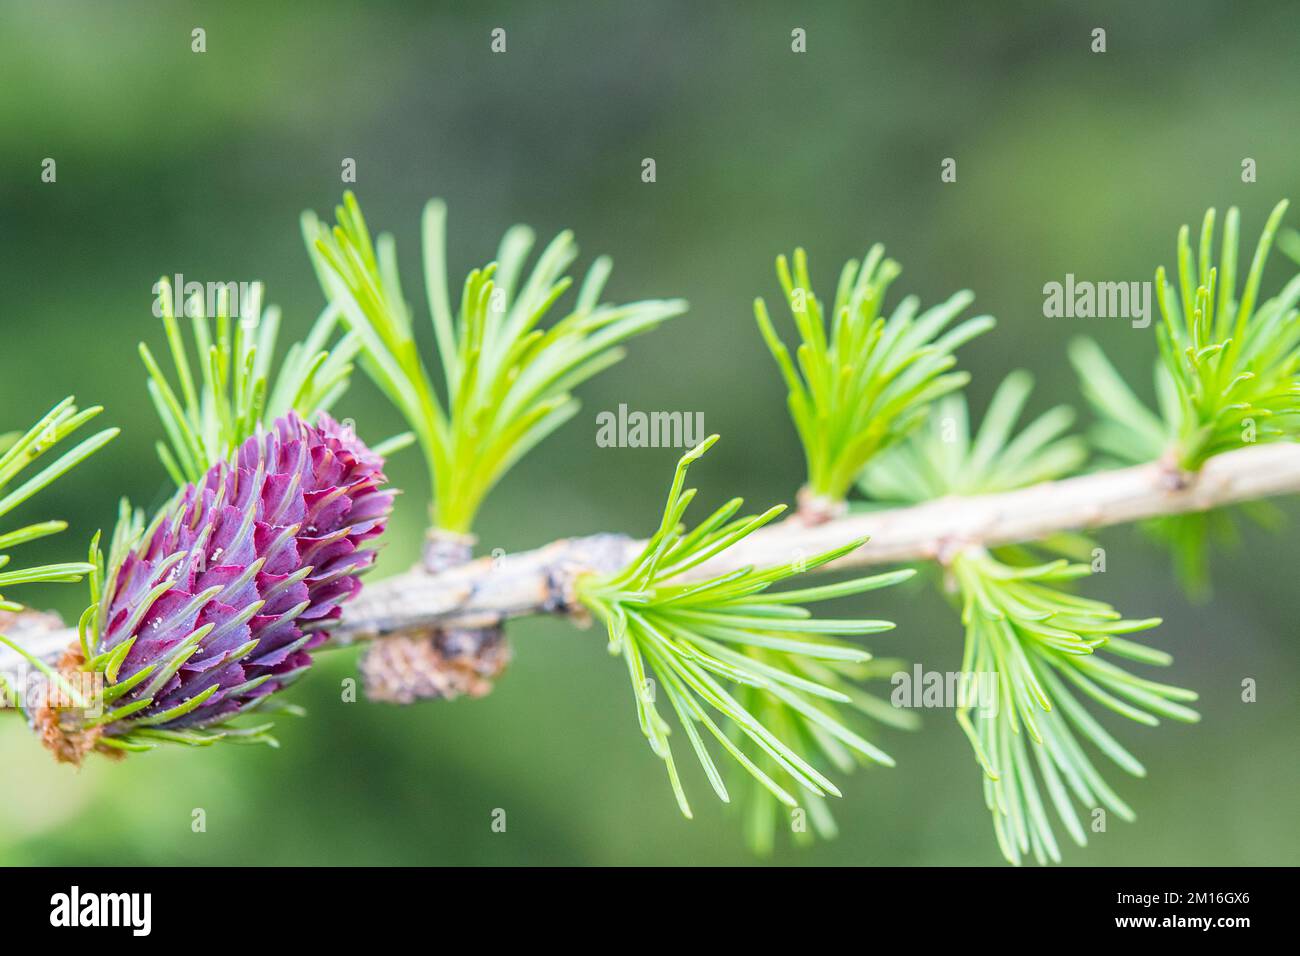 Larix decidua, the European larch, is a species of larch native to the mountains of central Europe, female, flower. Stock Photo